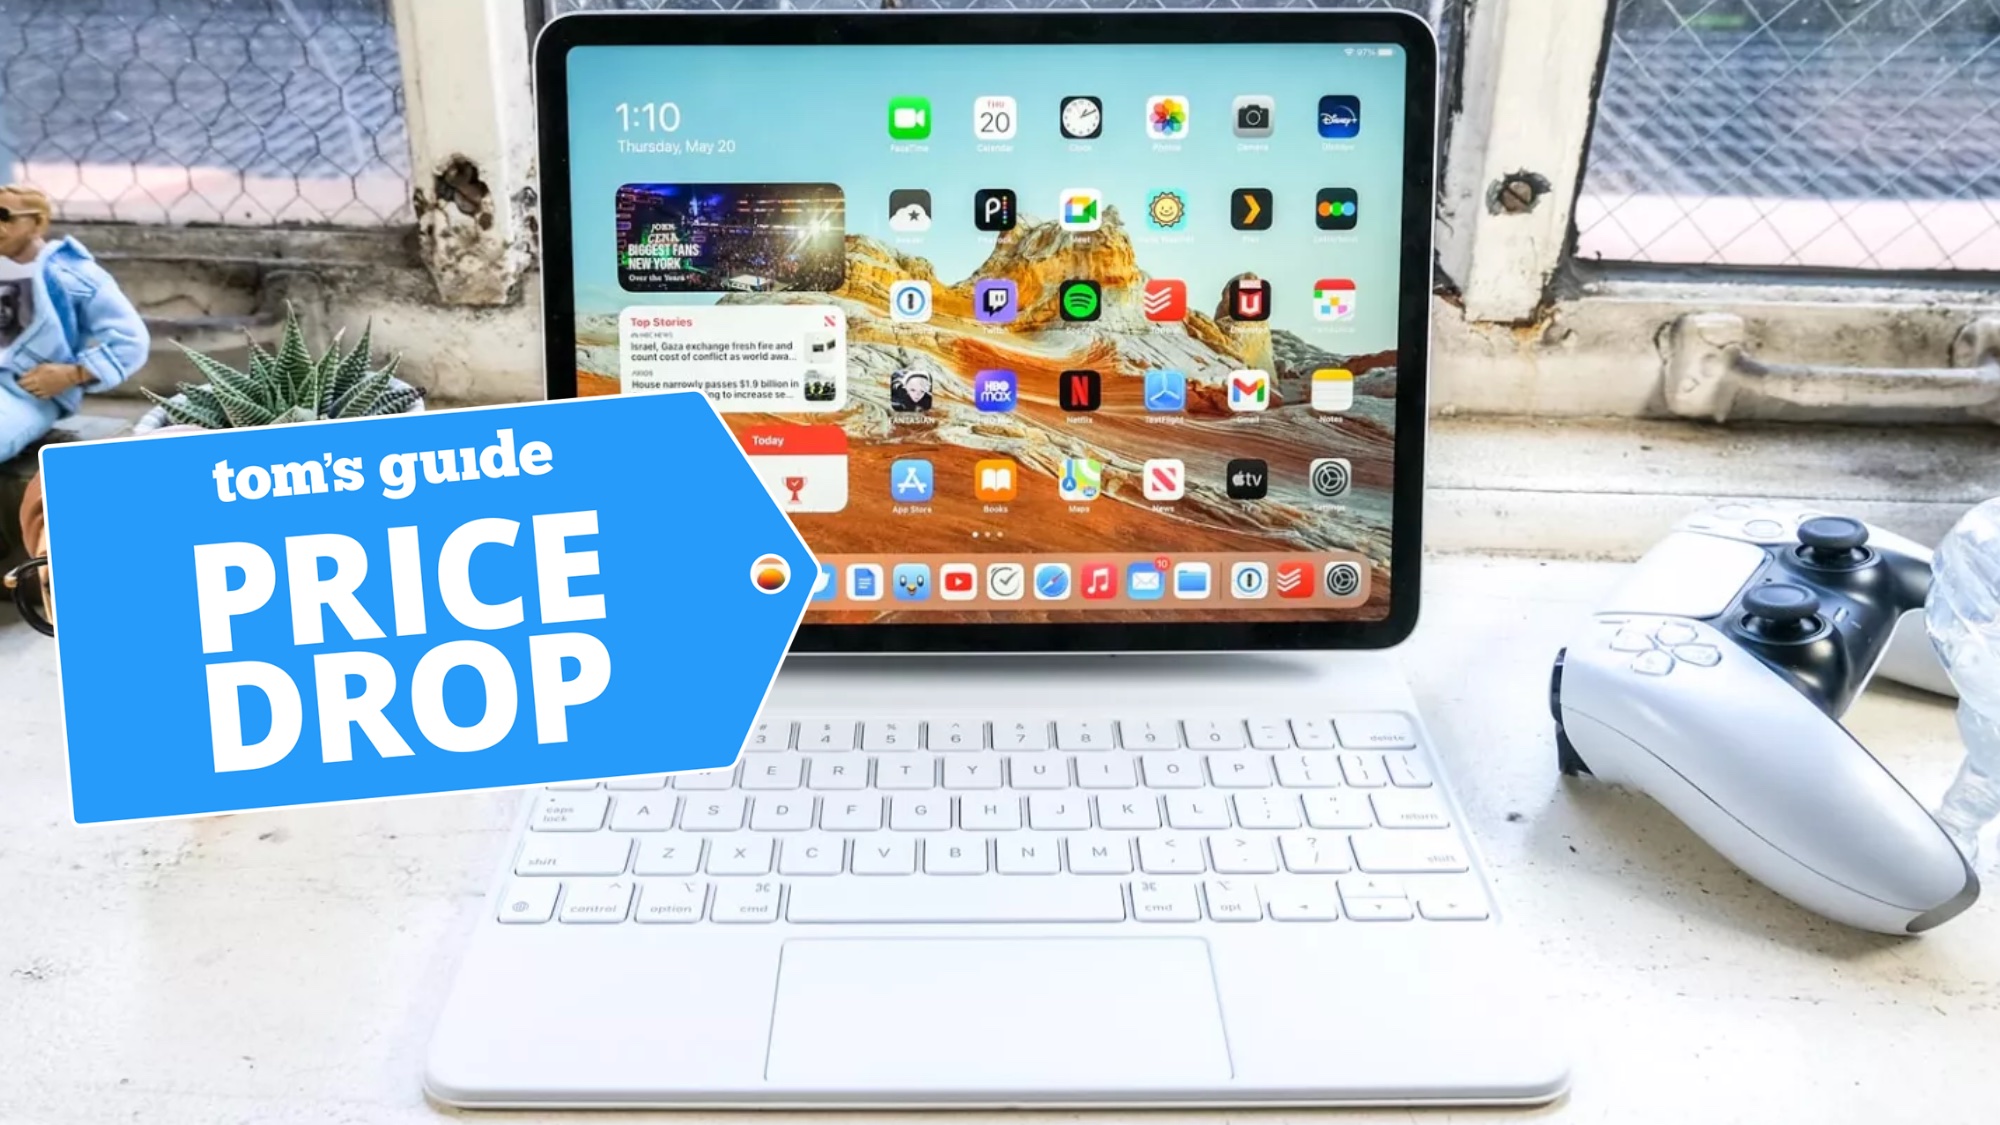 Quick! Snag the iPad Pro for 150 off ahead of Black Friday Tom's Guide